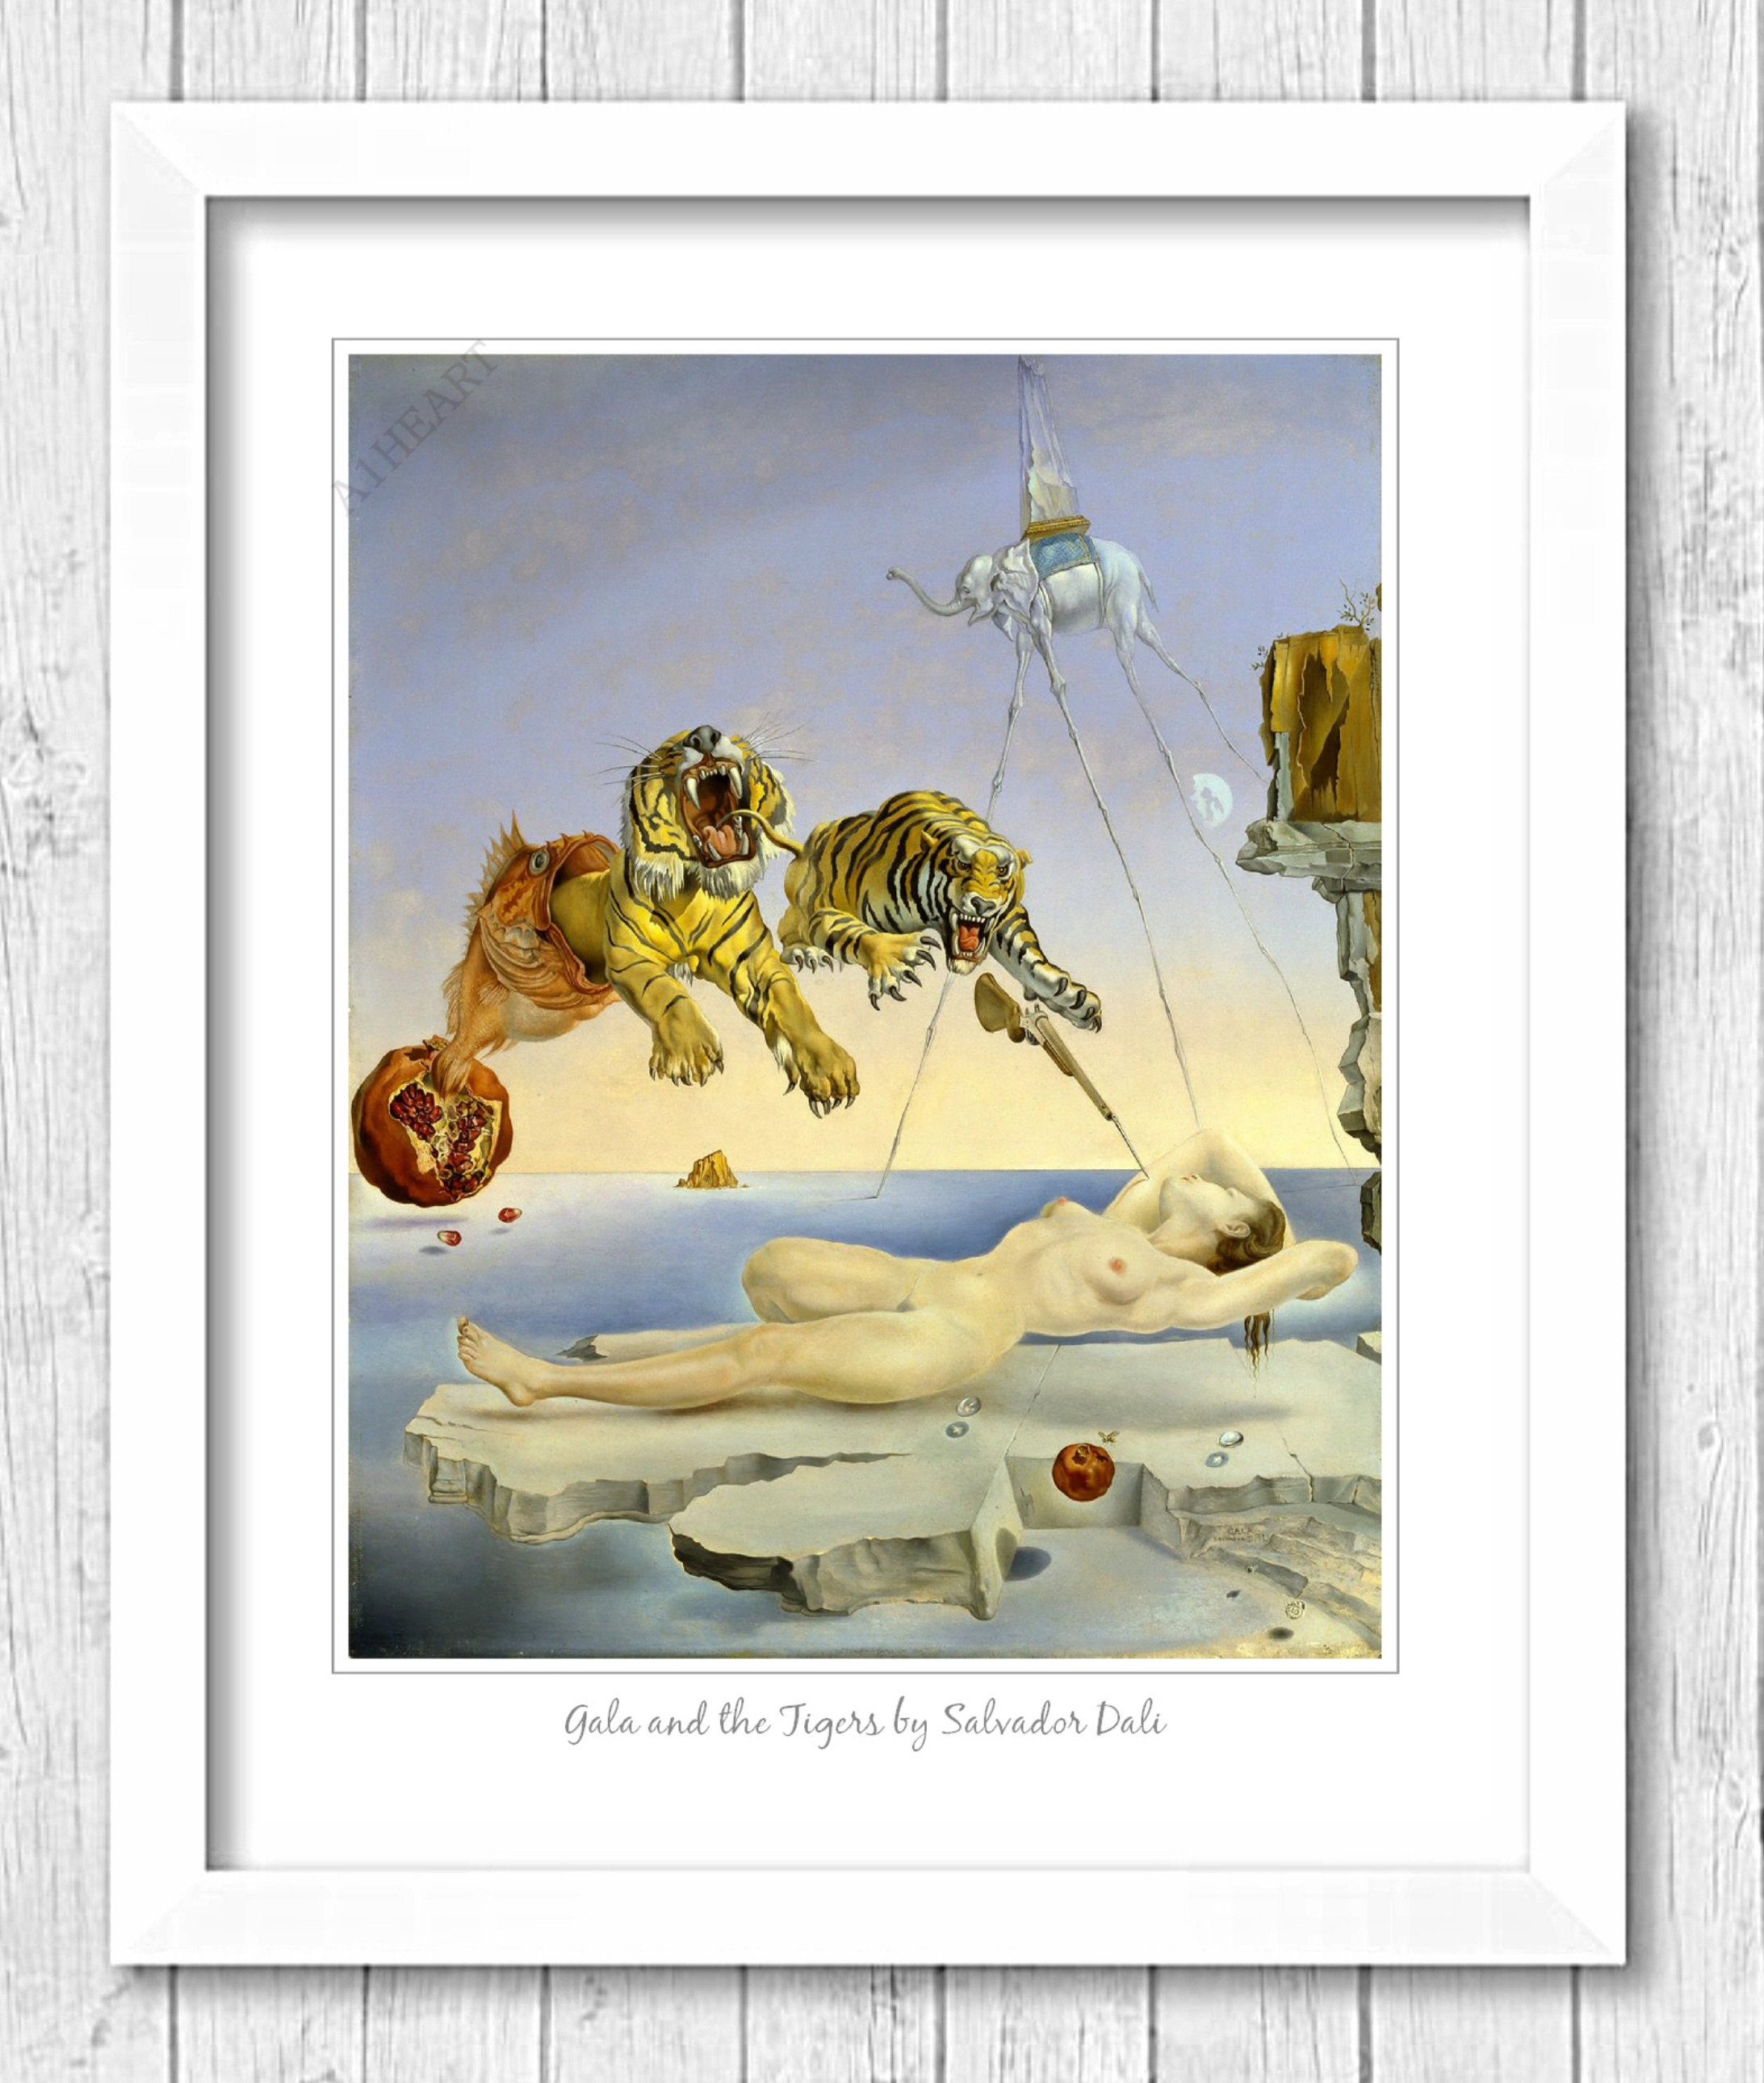 Gala and the Tigers by Salvador Dali Print Poster image